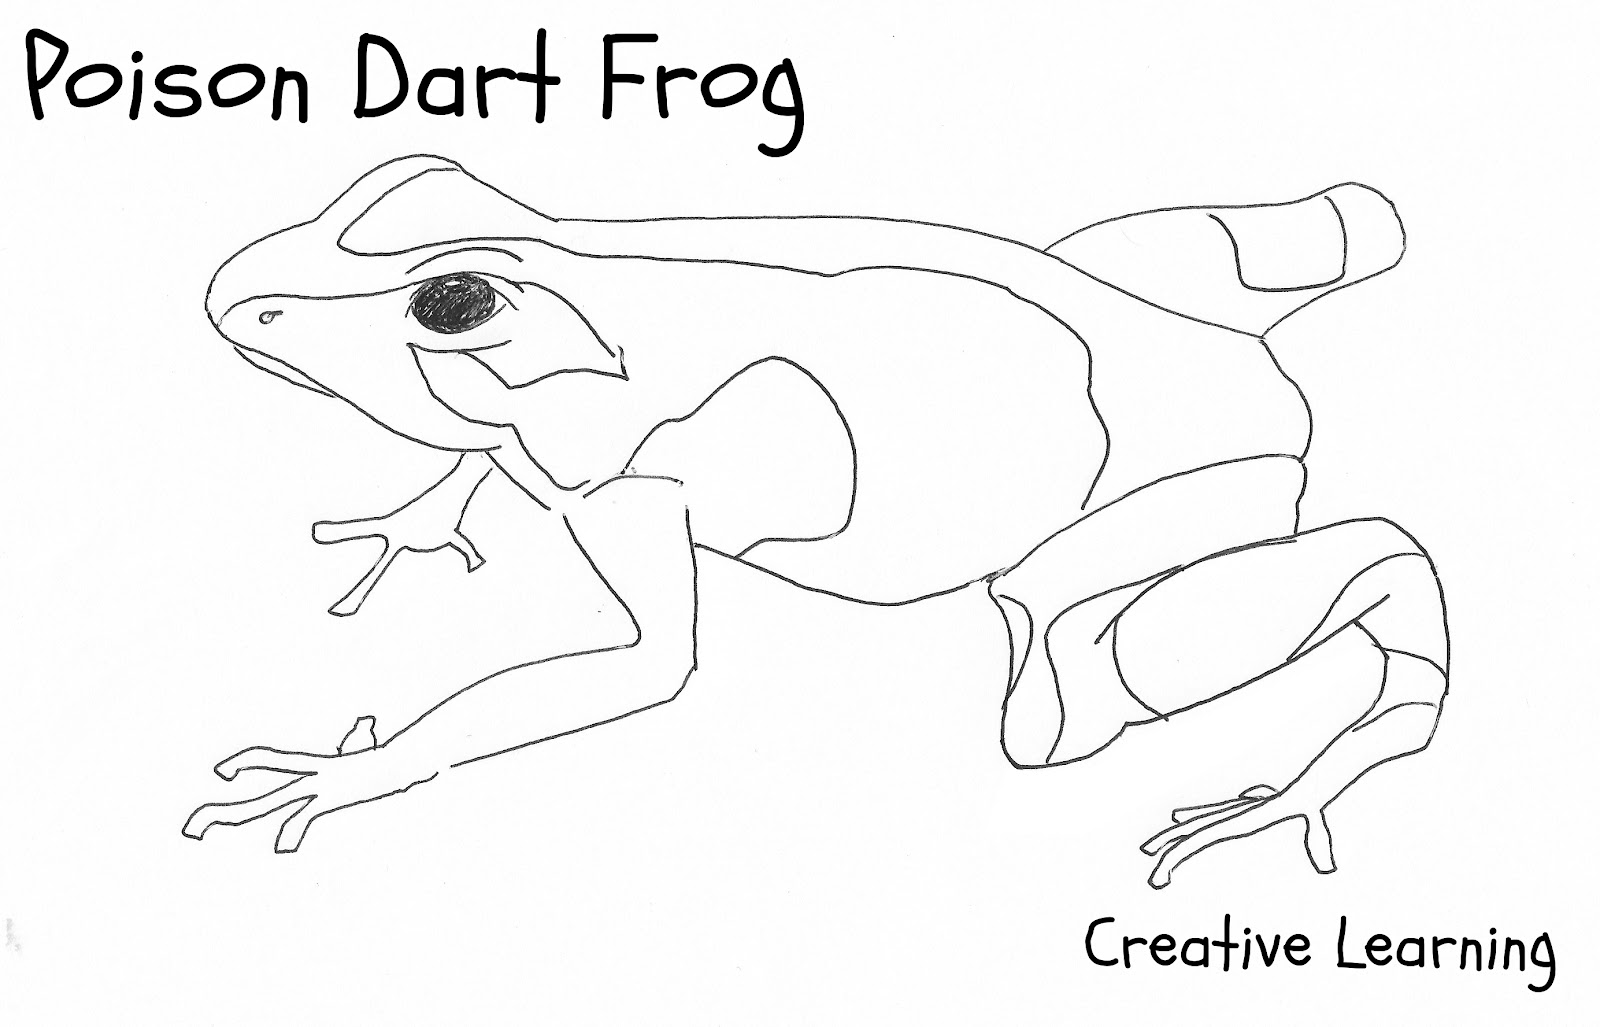 Poison Dart Frog coloring #18, Download drawings